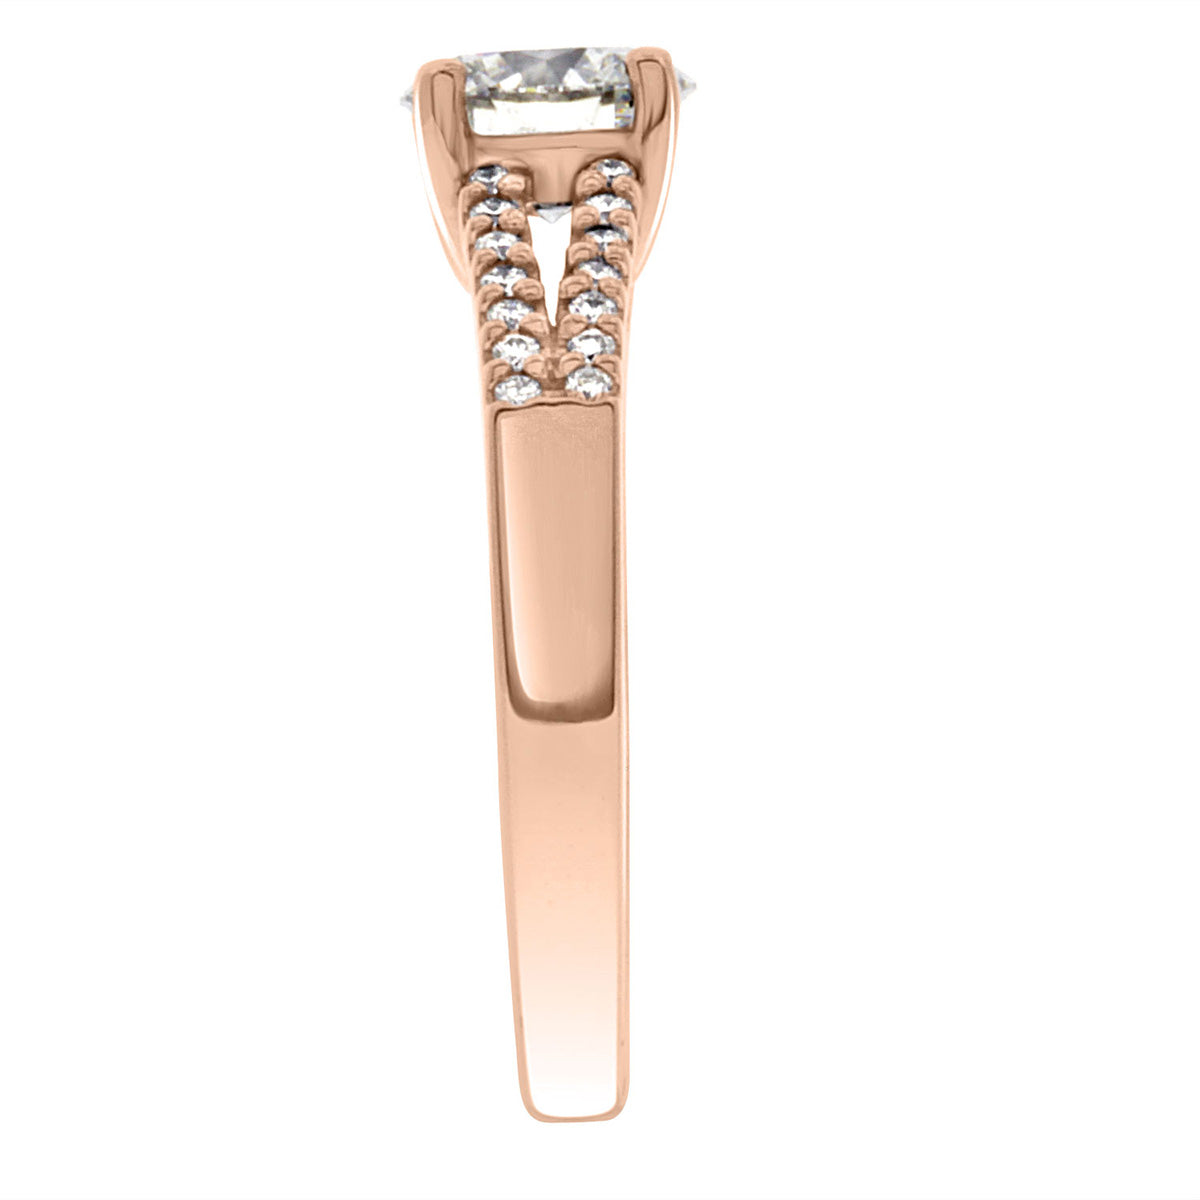 Round Diamond With Split Band made from rose gold standing upright and in end view